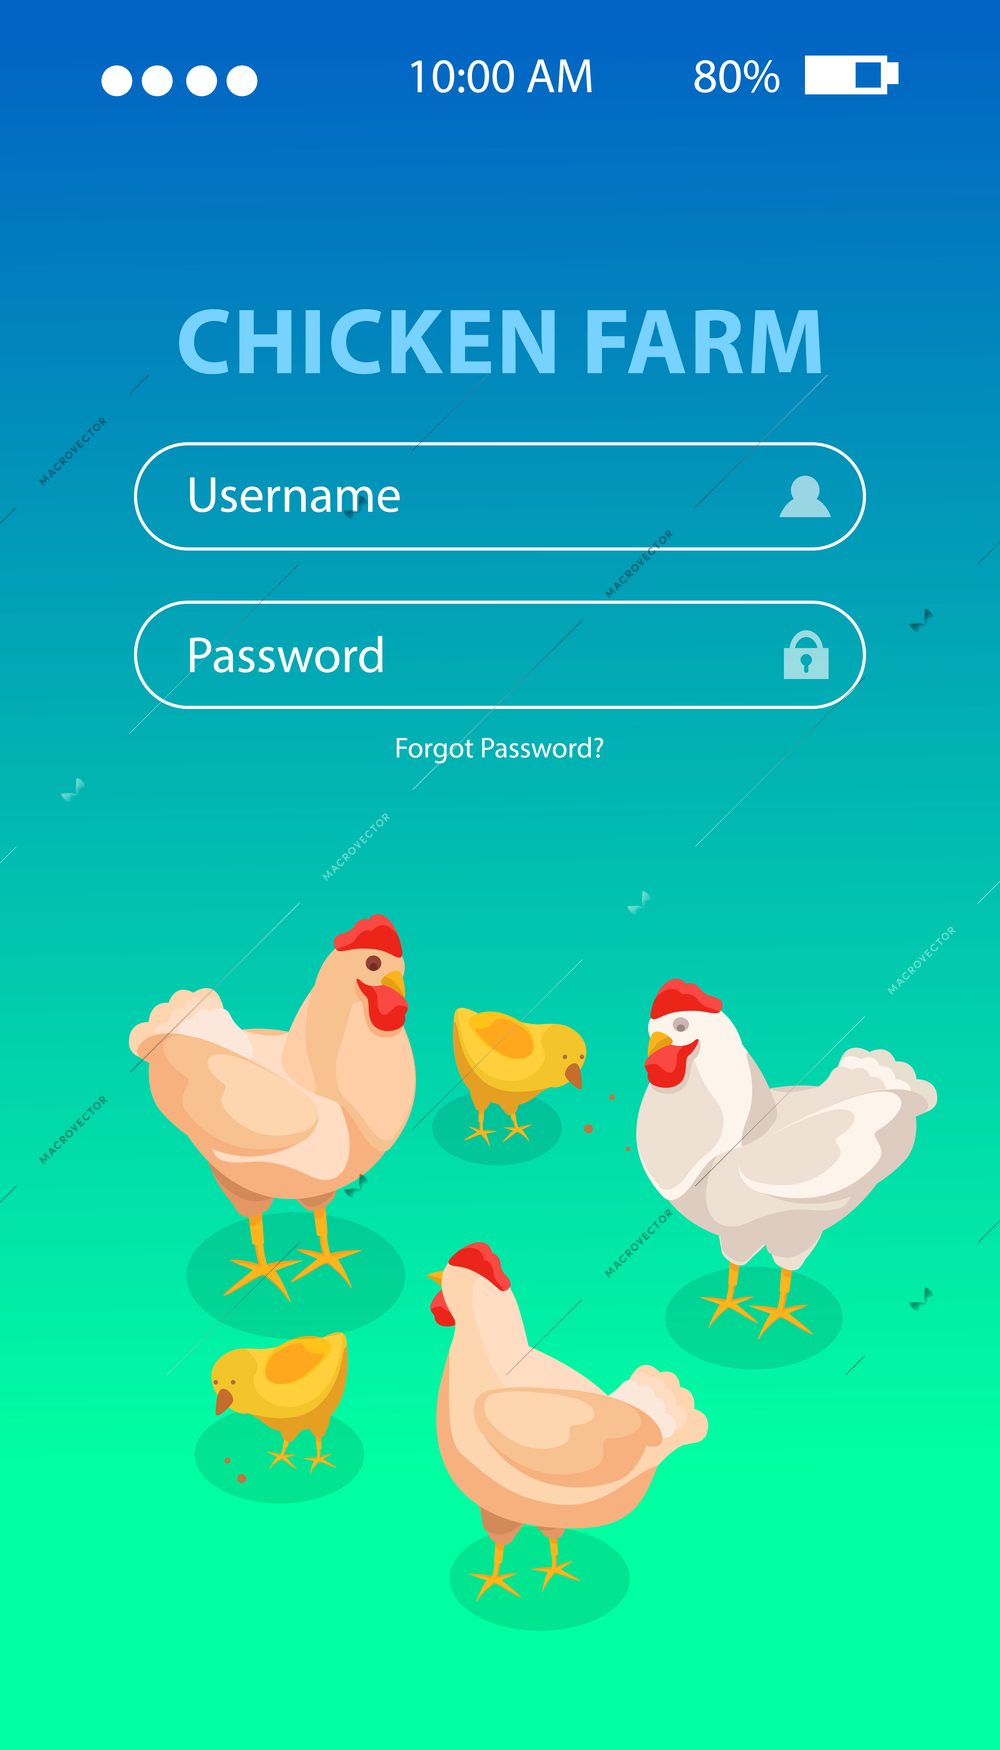 Chicken farm isometric background with vertical smartphone screen login forms and images of hens and chickens vector illustration